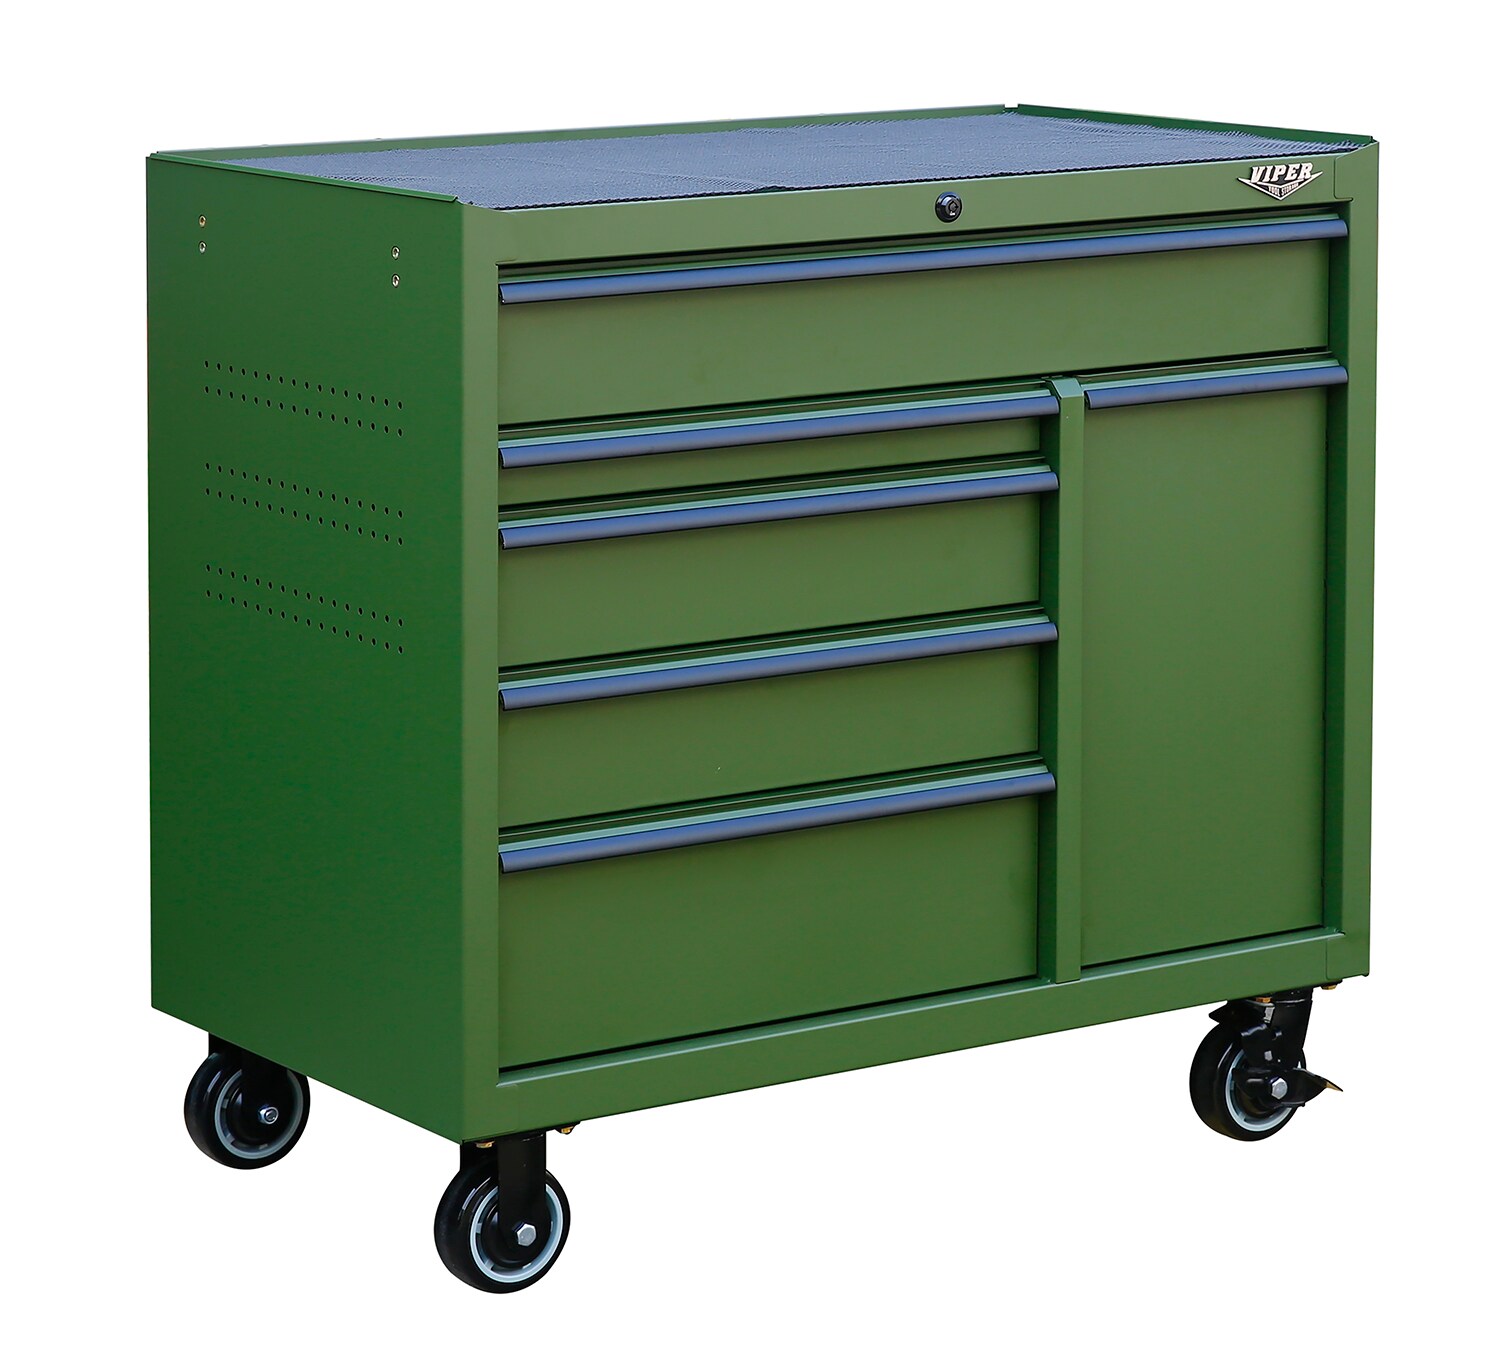 Viper Tool Storage 18-in W x 11.5-in H 2-Drawer Steel Tool Chest (Green) in  the Top Tool Chests department at